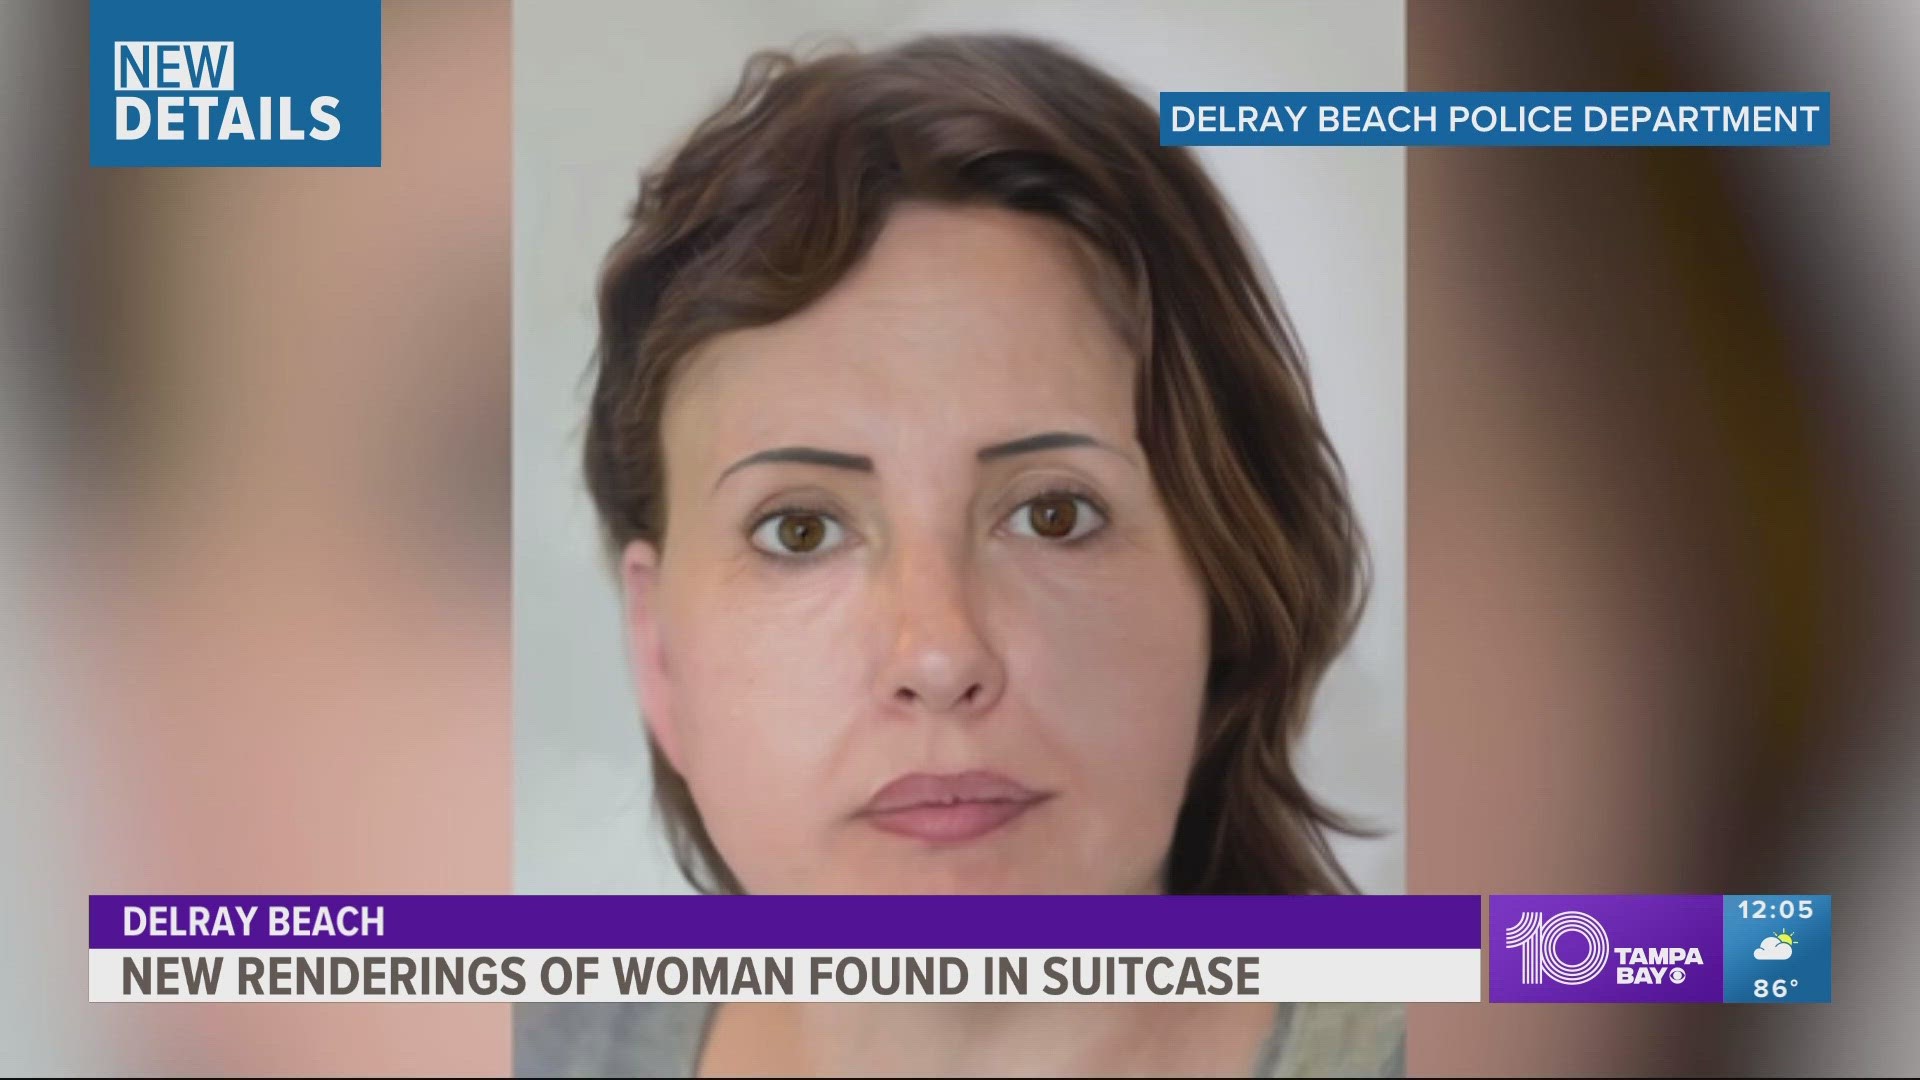 The reconstructed images show what she may have looked like, police say.